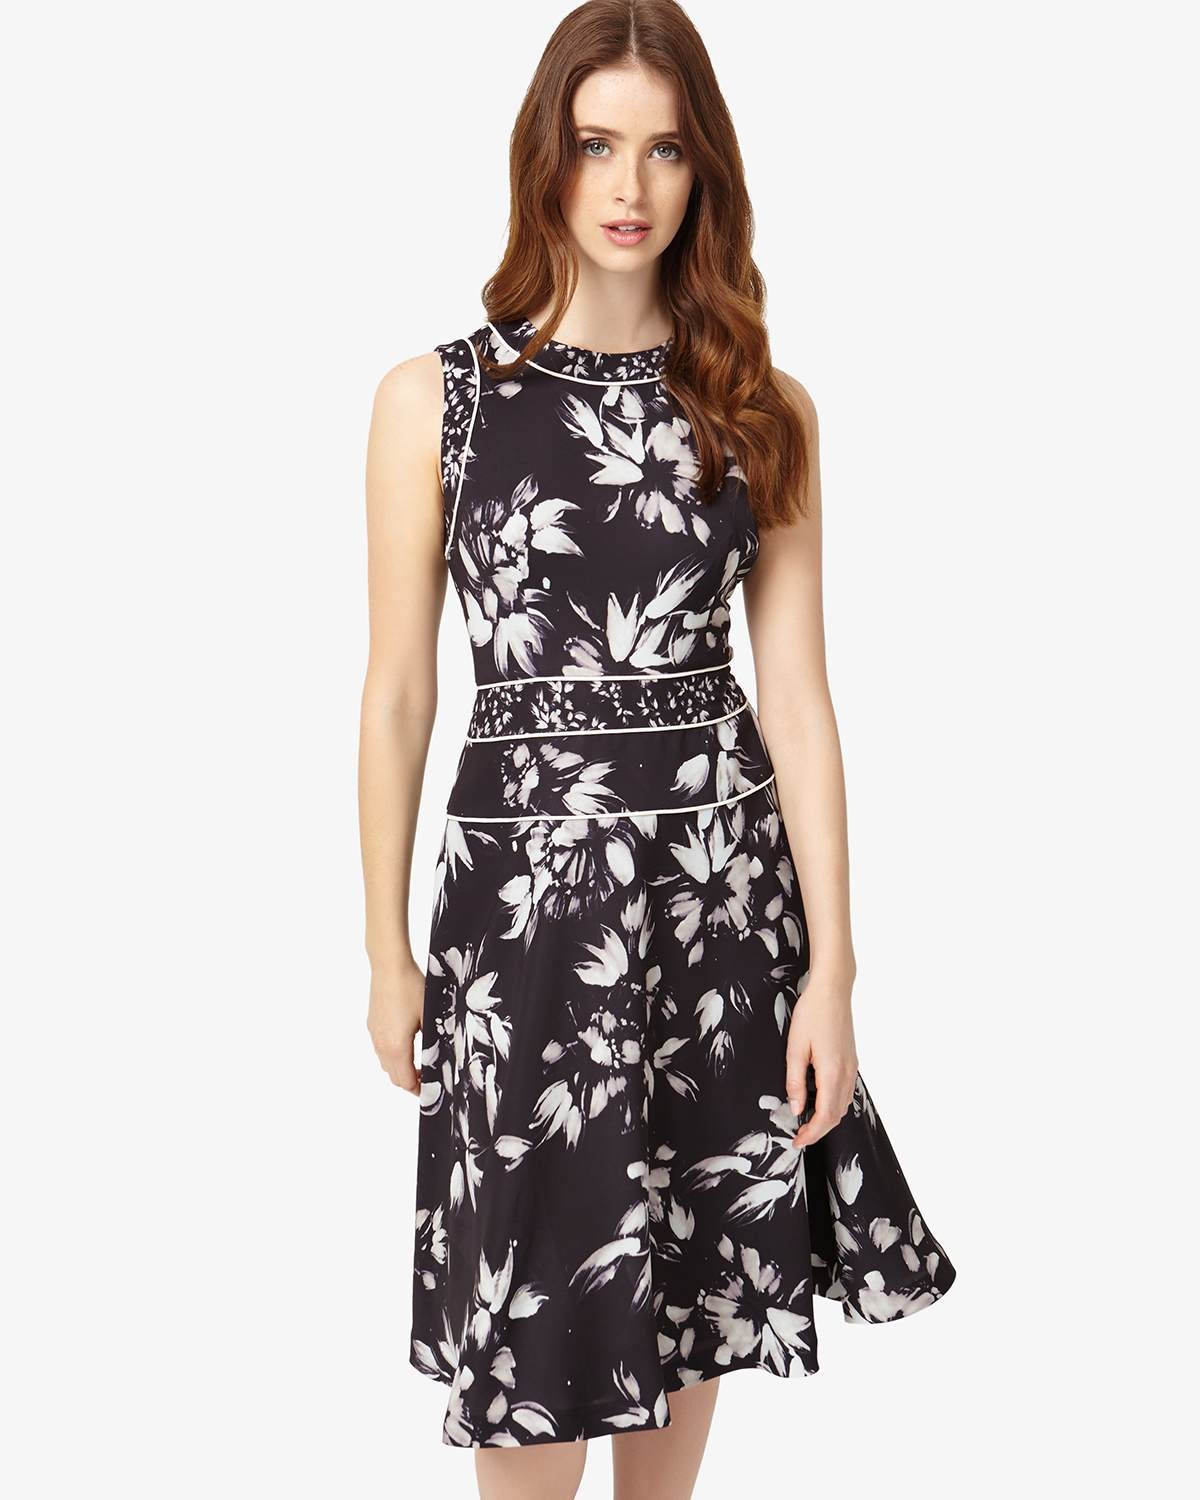 Phase Eight Black Dresses Darby Floral Dress